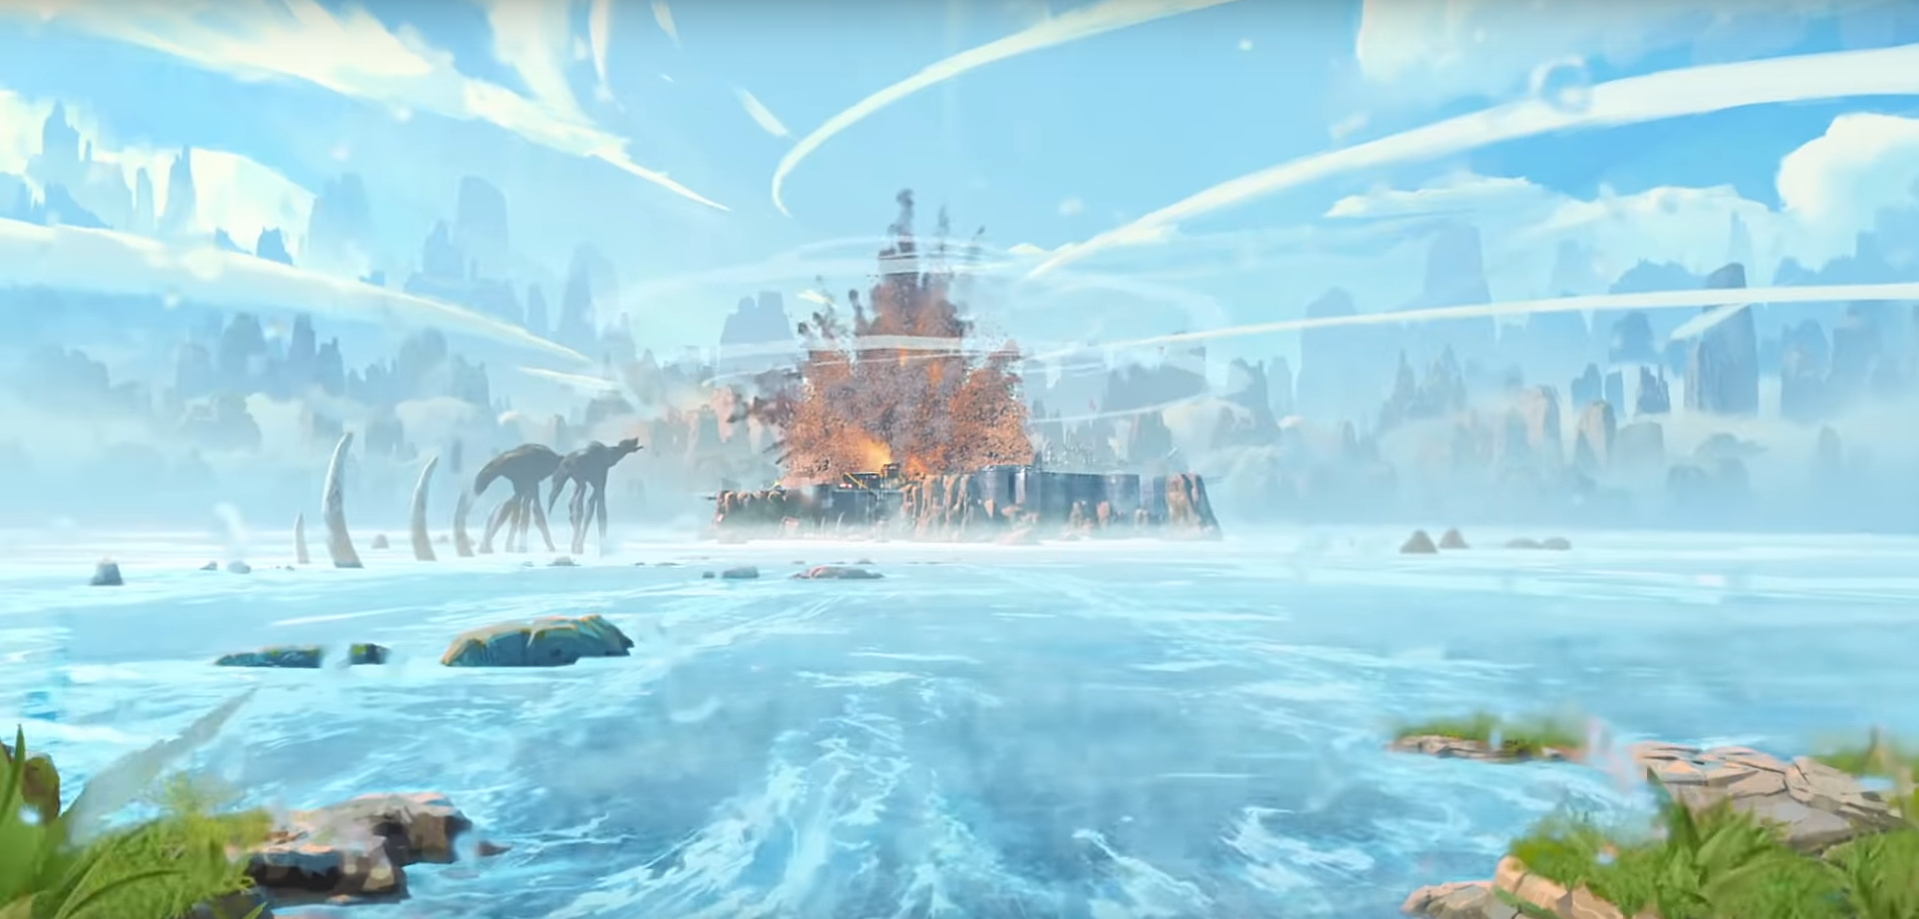 Fuse S Rival Maggie Blows Up Kings Canyon In Apex Legends Season 8 Launch Trailer Dot Esports